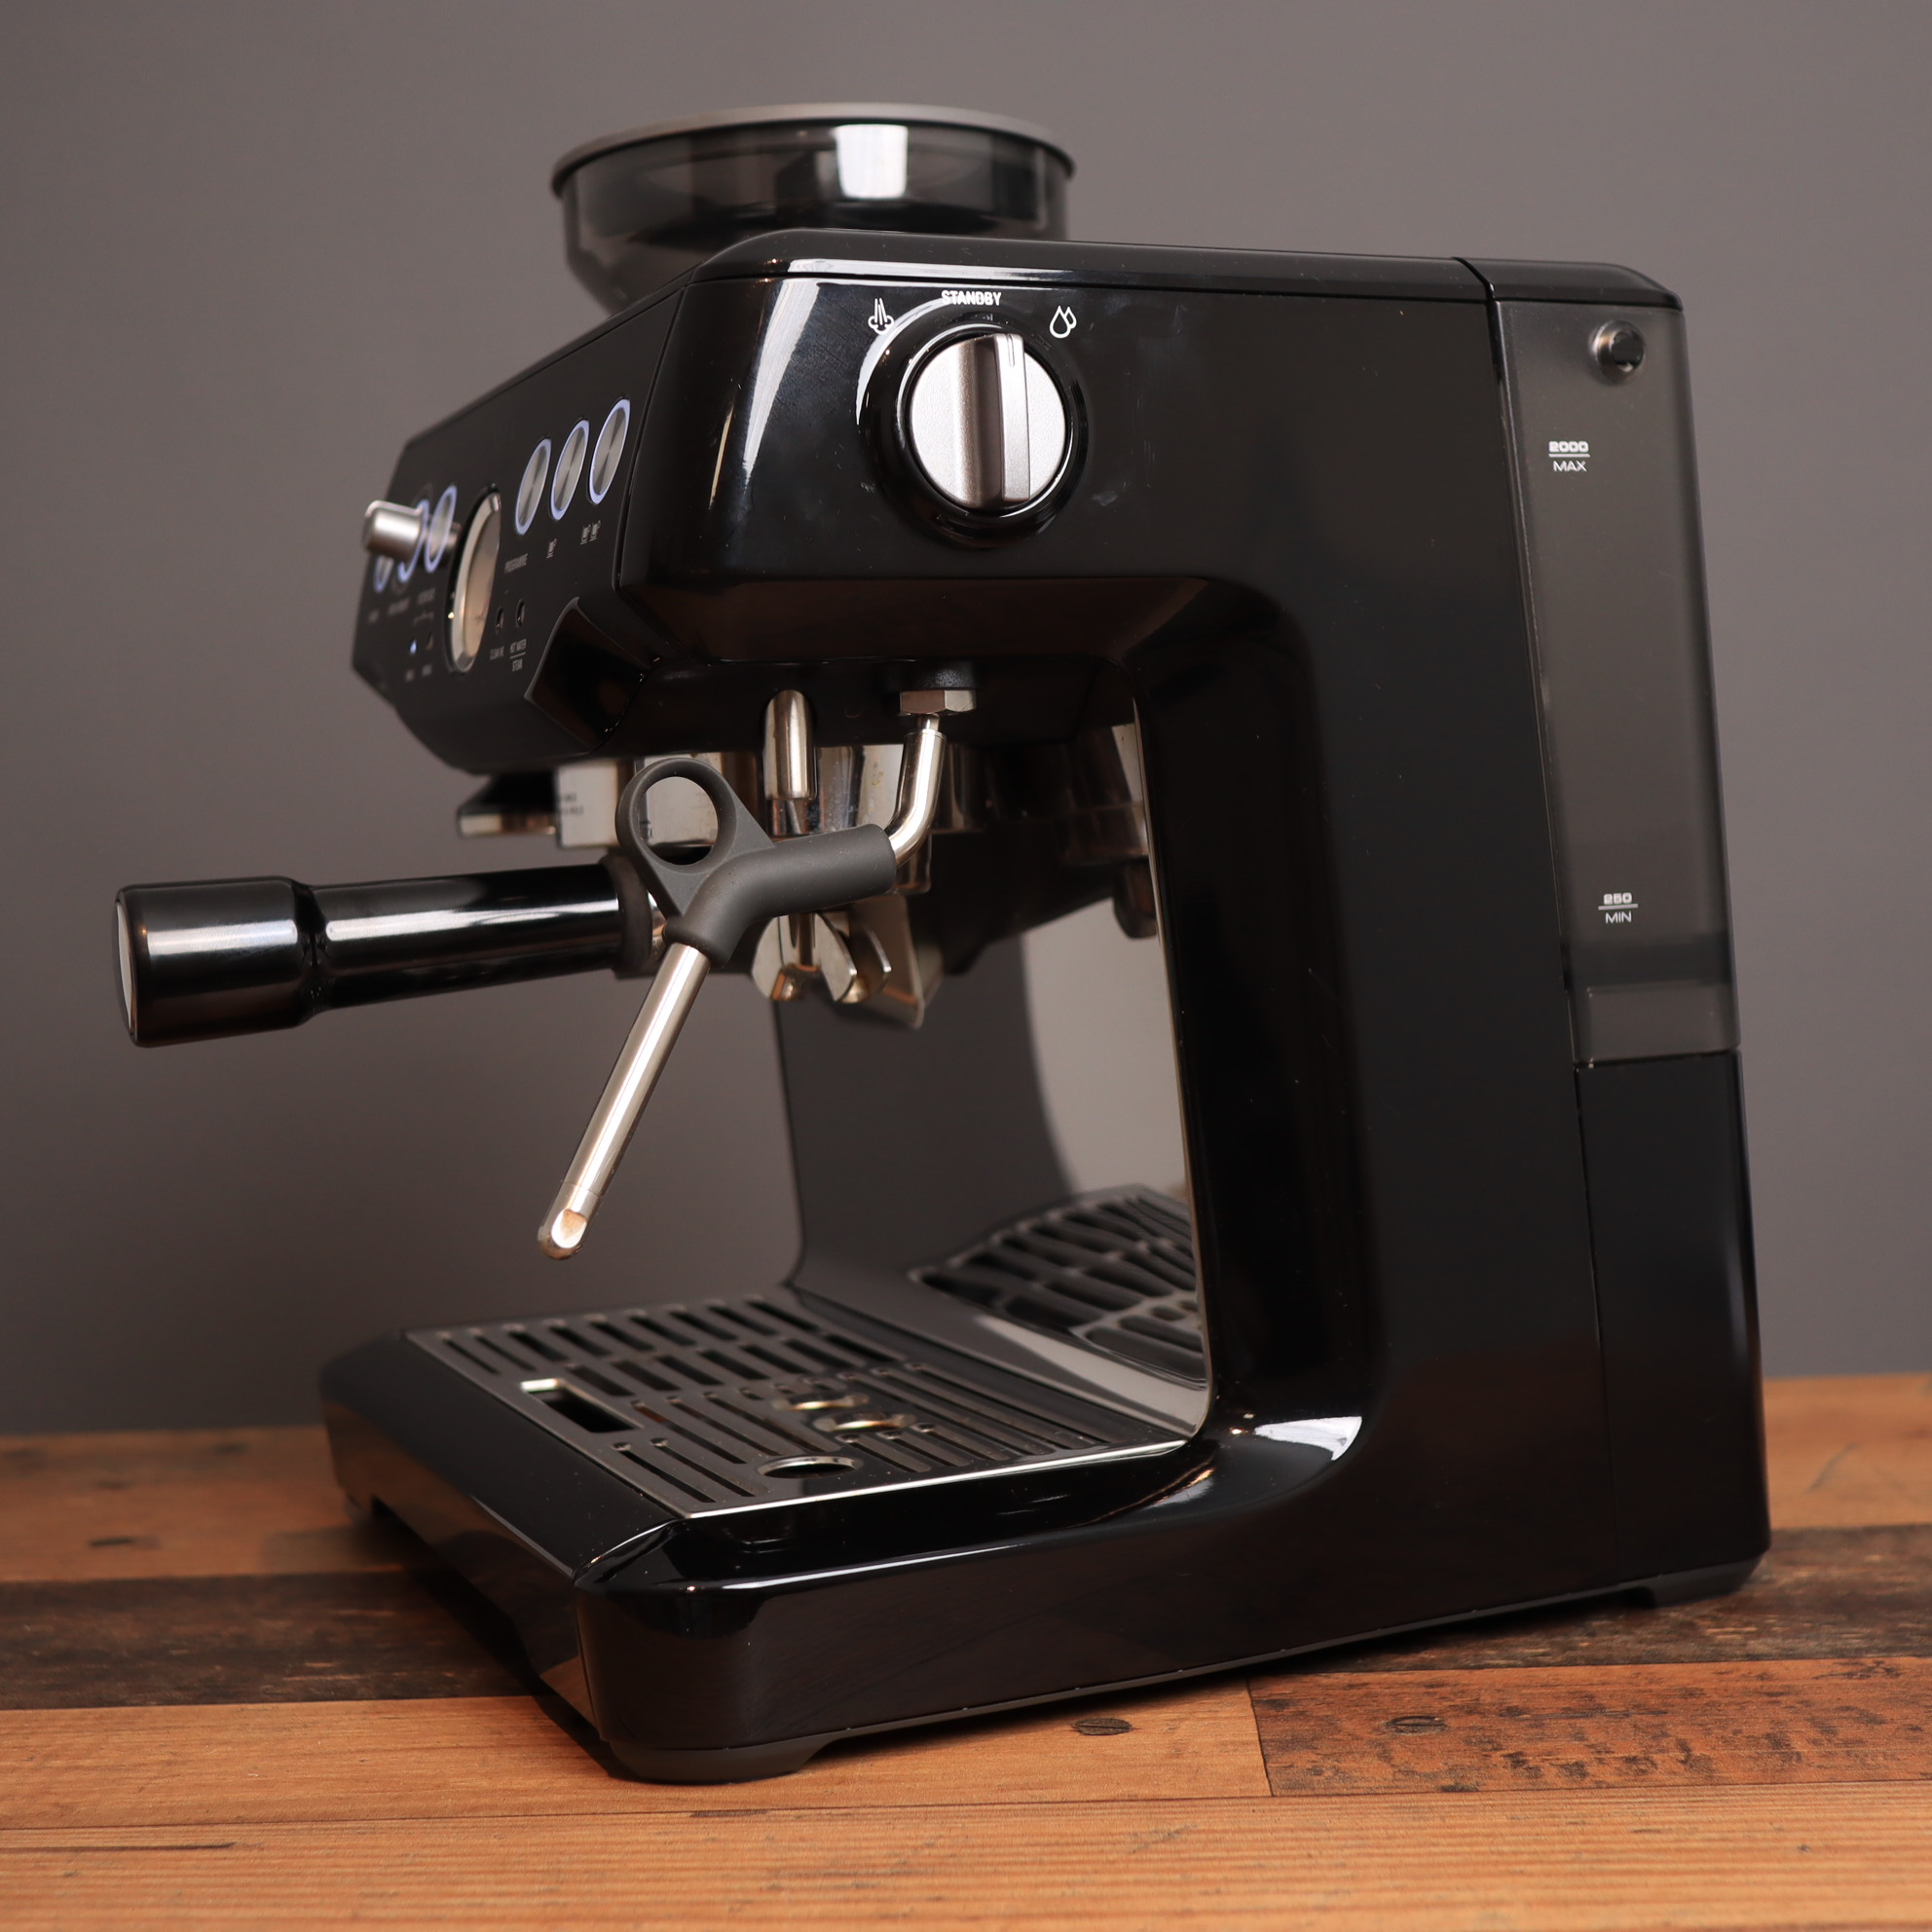 Breville Barista Express from the right side